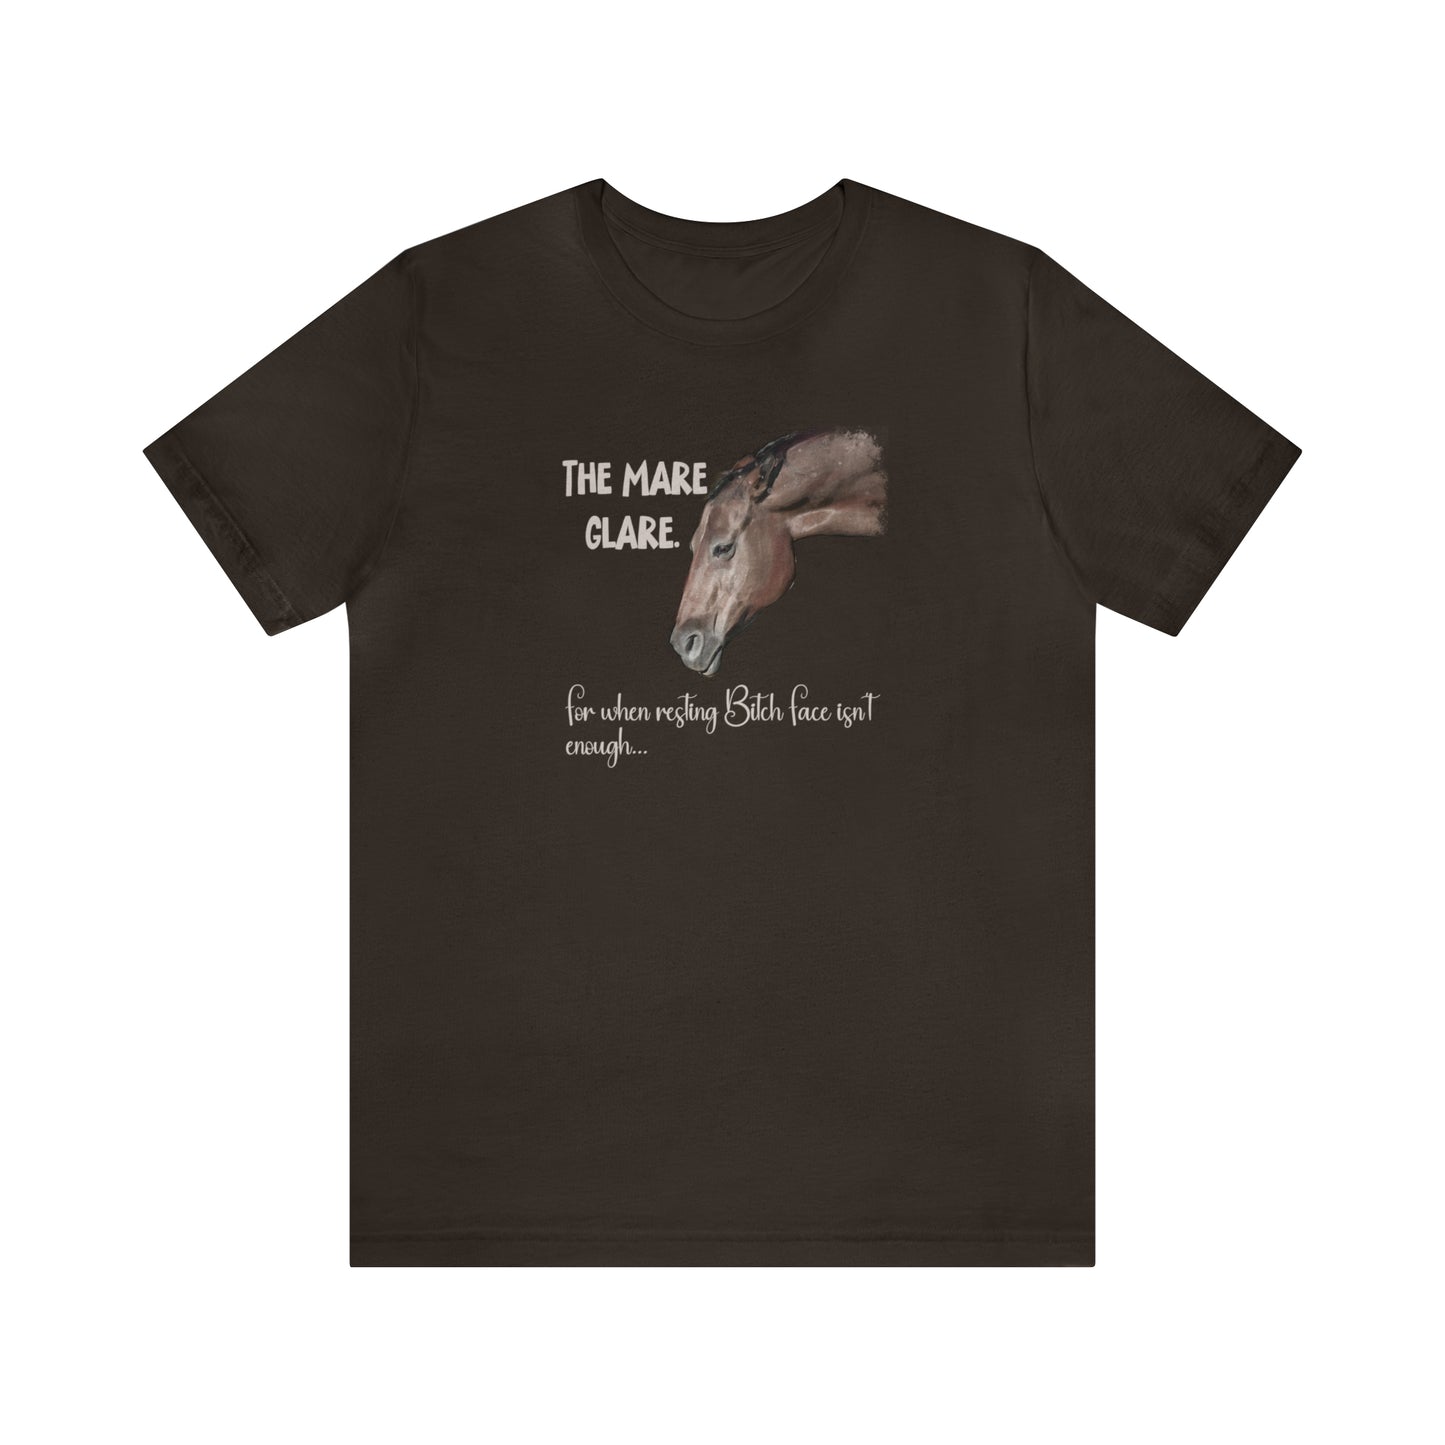 Silly Horse T-shirt: Funny, Angry Horse T-shirt for Horse Lovers